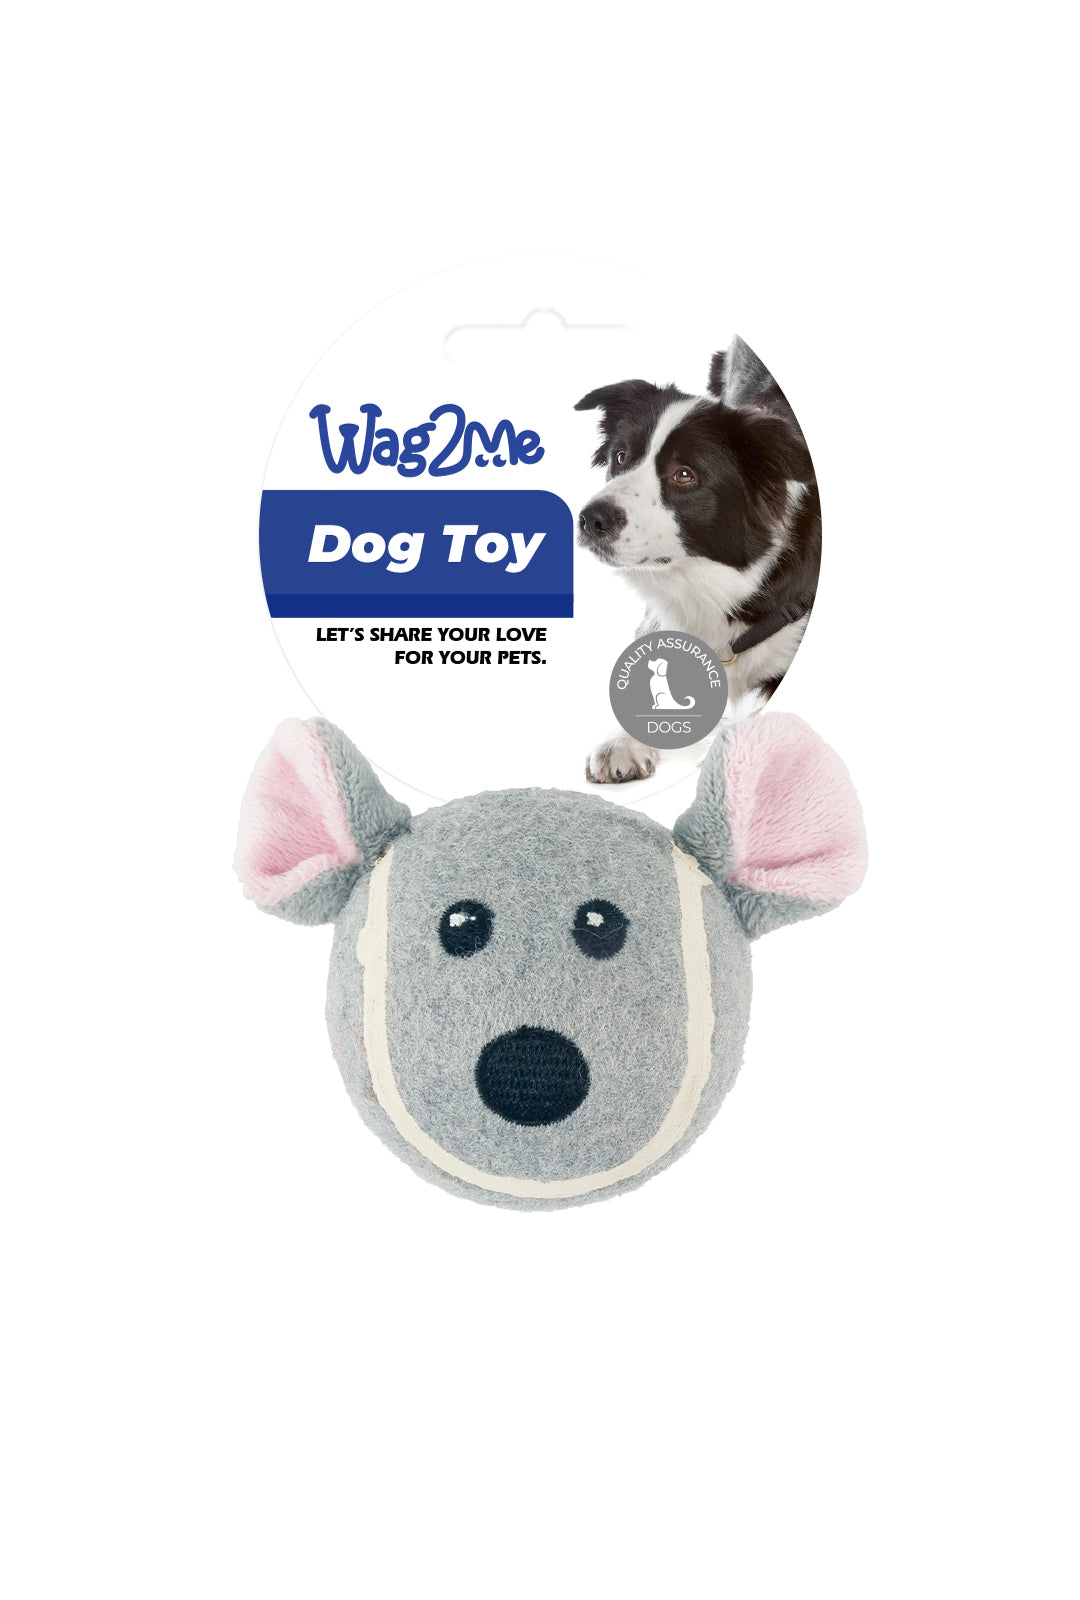 Wag2me Tooth Plush Cleaning Dog Toy